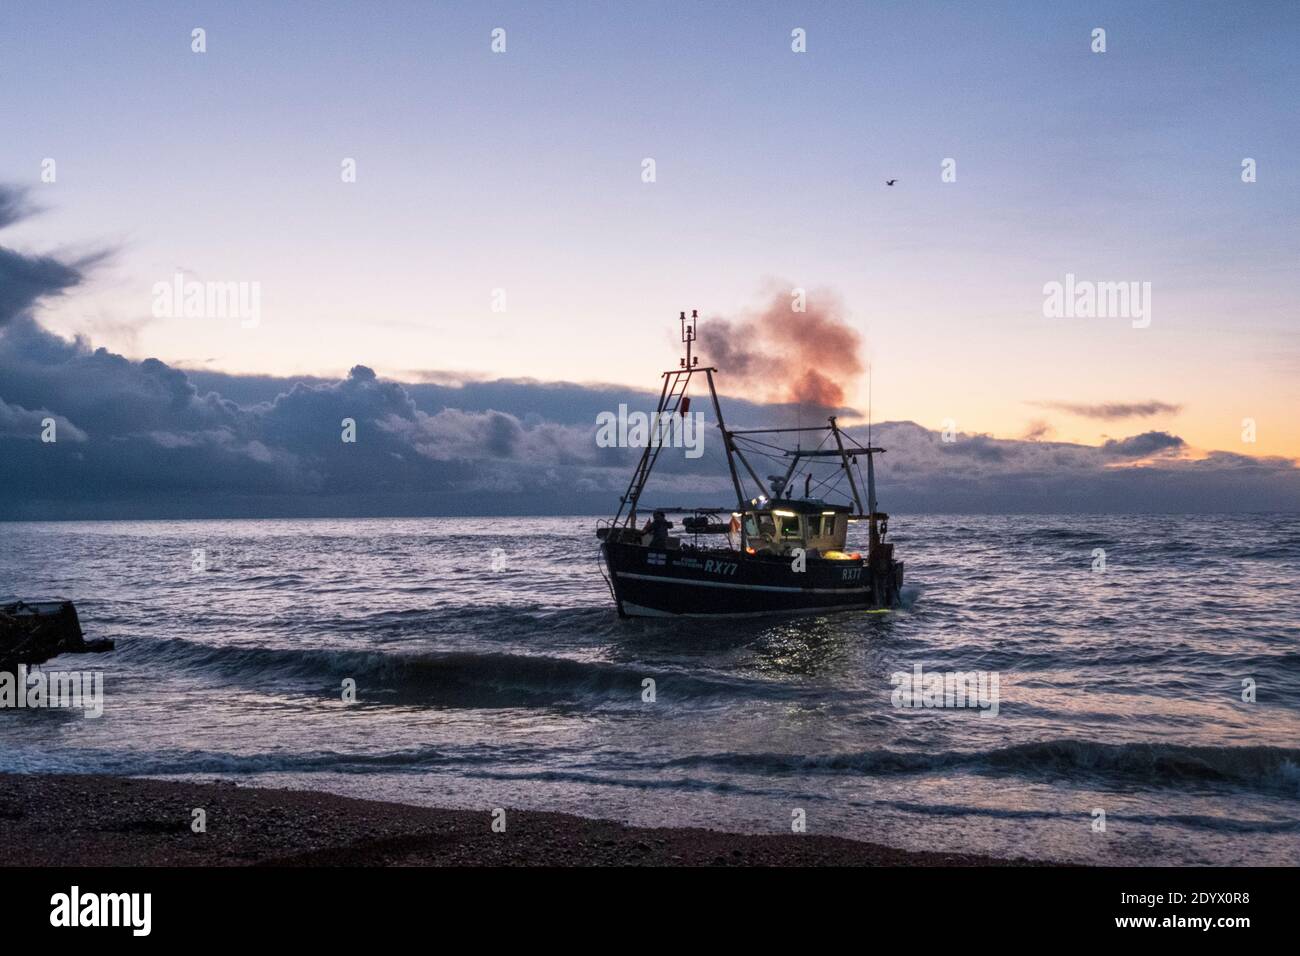 Hastings, East Sussex, UK 28th December 2020. Hastings fishing trawler launches at dawn, from the Old Town Stade fishermen's beach. With more than 25 boats Hastings has the largest beach-launched fishing fleet in Europe. Carolyn Clarke/Alamy Live News Stock Photo